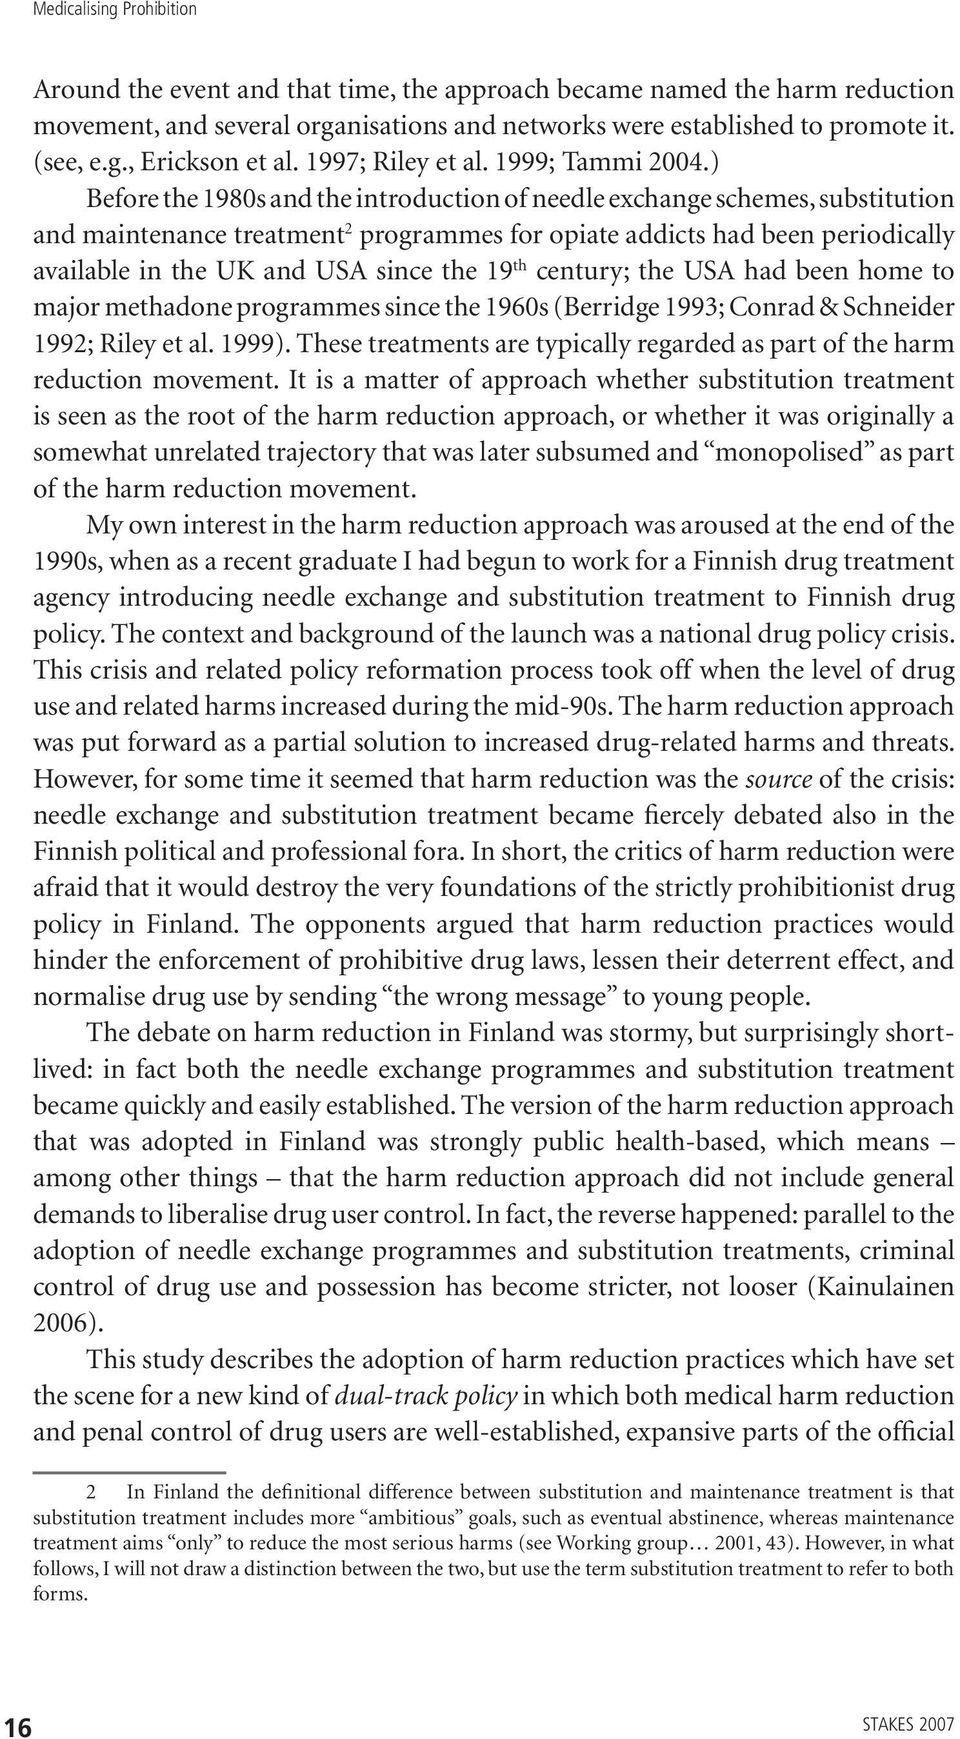 ) Before the 1980s and the introduction of needle exchange schemes, substitution and maintenance treatment 2 programmes for opiate addicts had been periodically available in the UK and USA since the